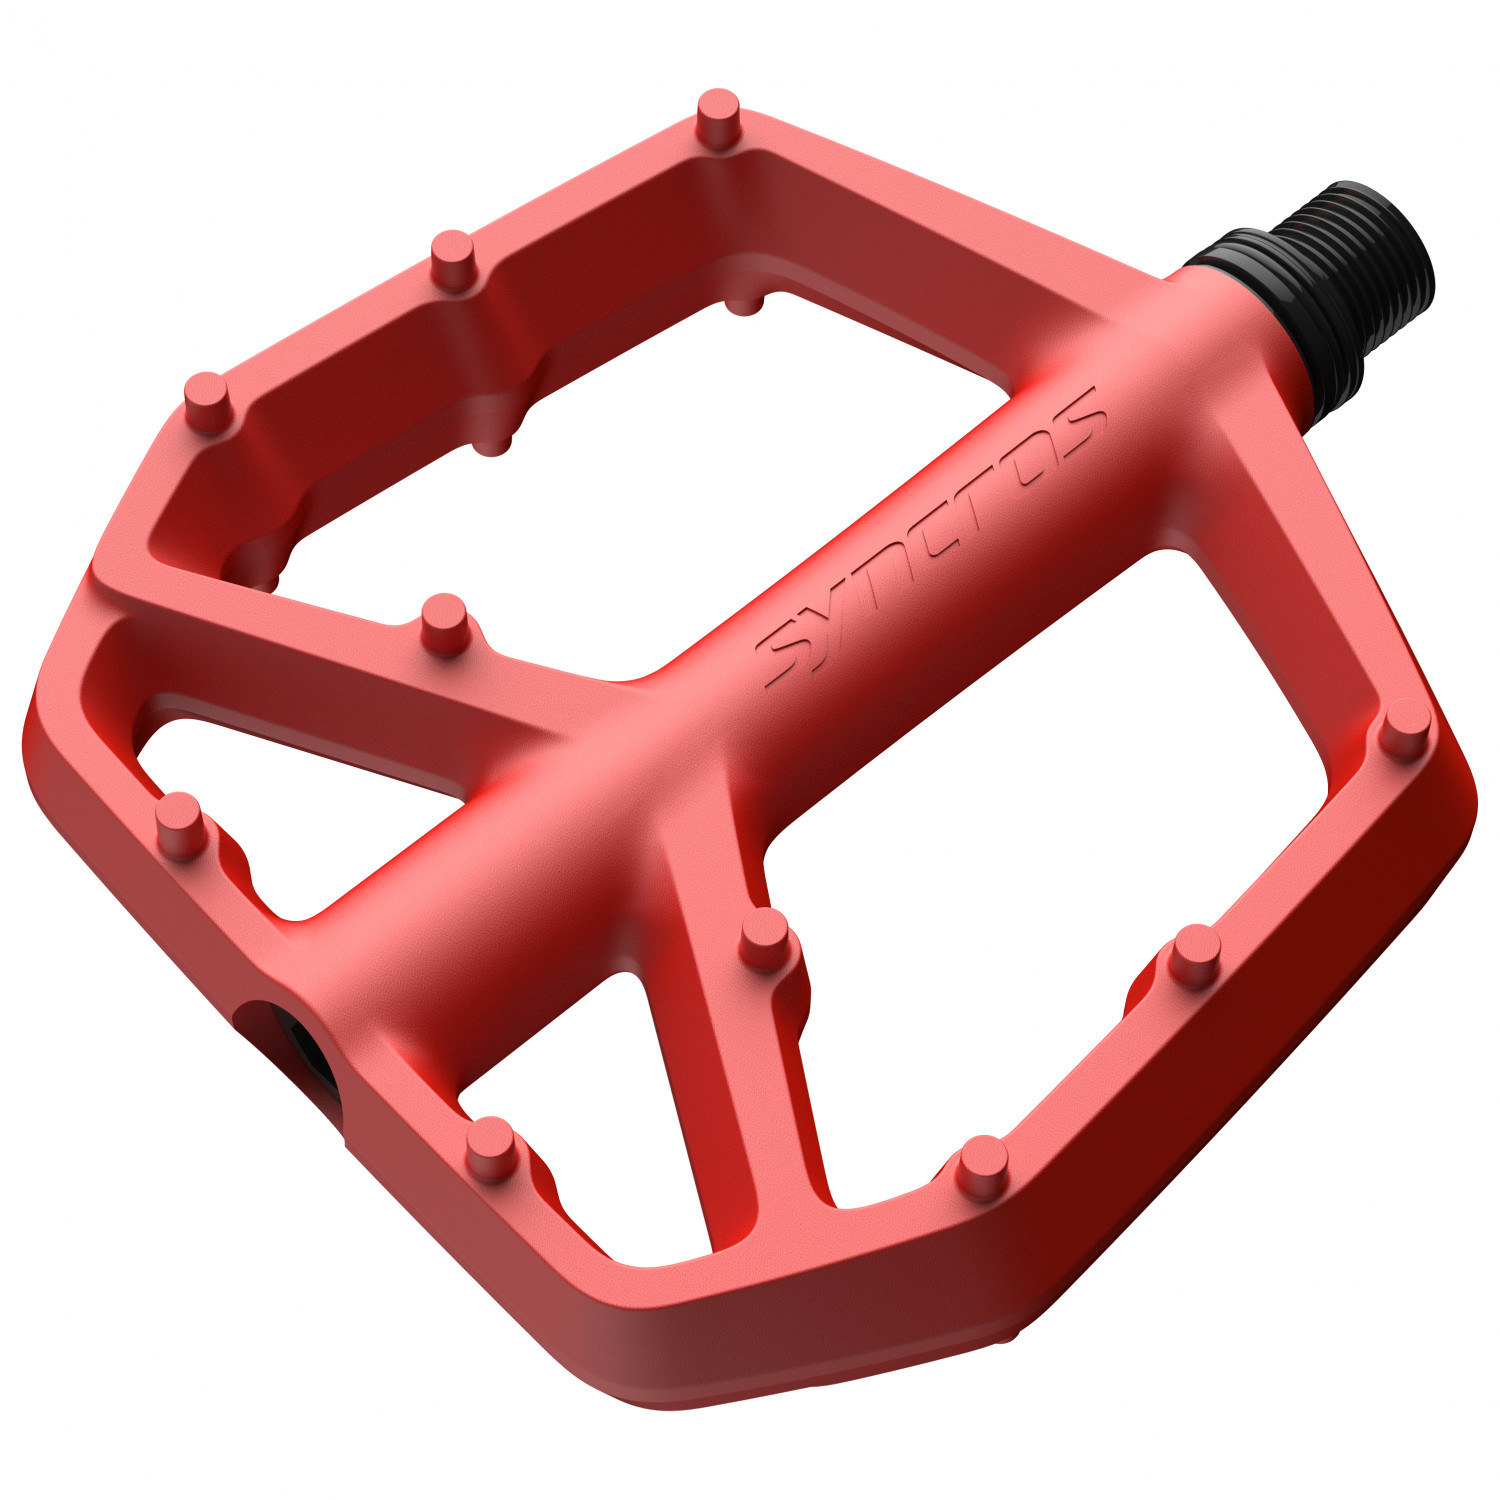 Педали платформы Syncros Flat Pedals Squamish III, цвет Florida Red 105 pd r7000 pd5800 r540 r550 road bike pedals carbon self locking pedals spd pedals with sm sh11 cleats